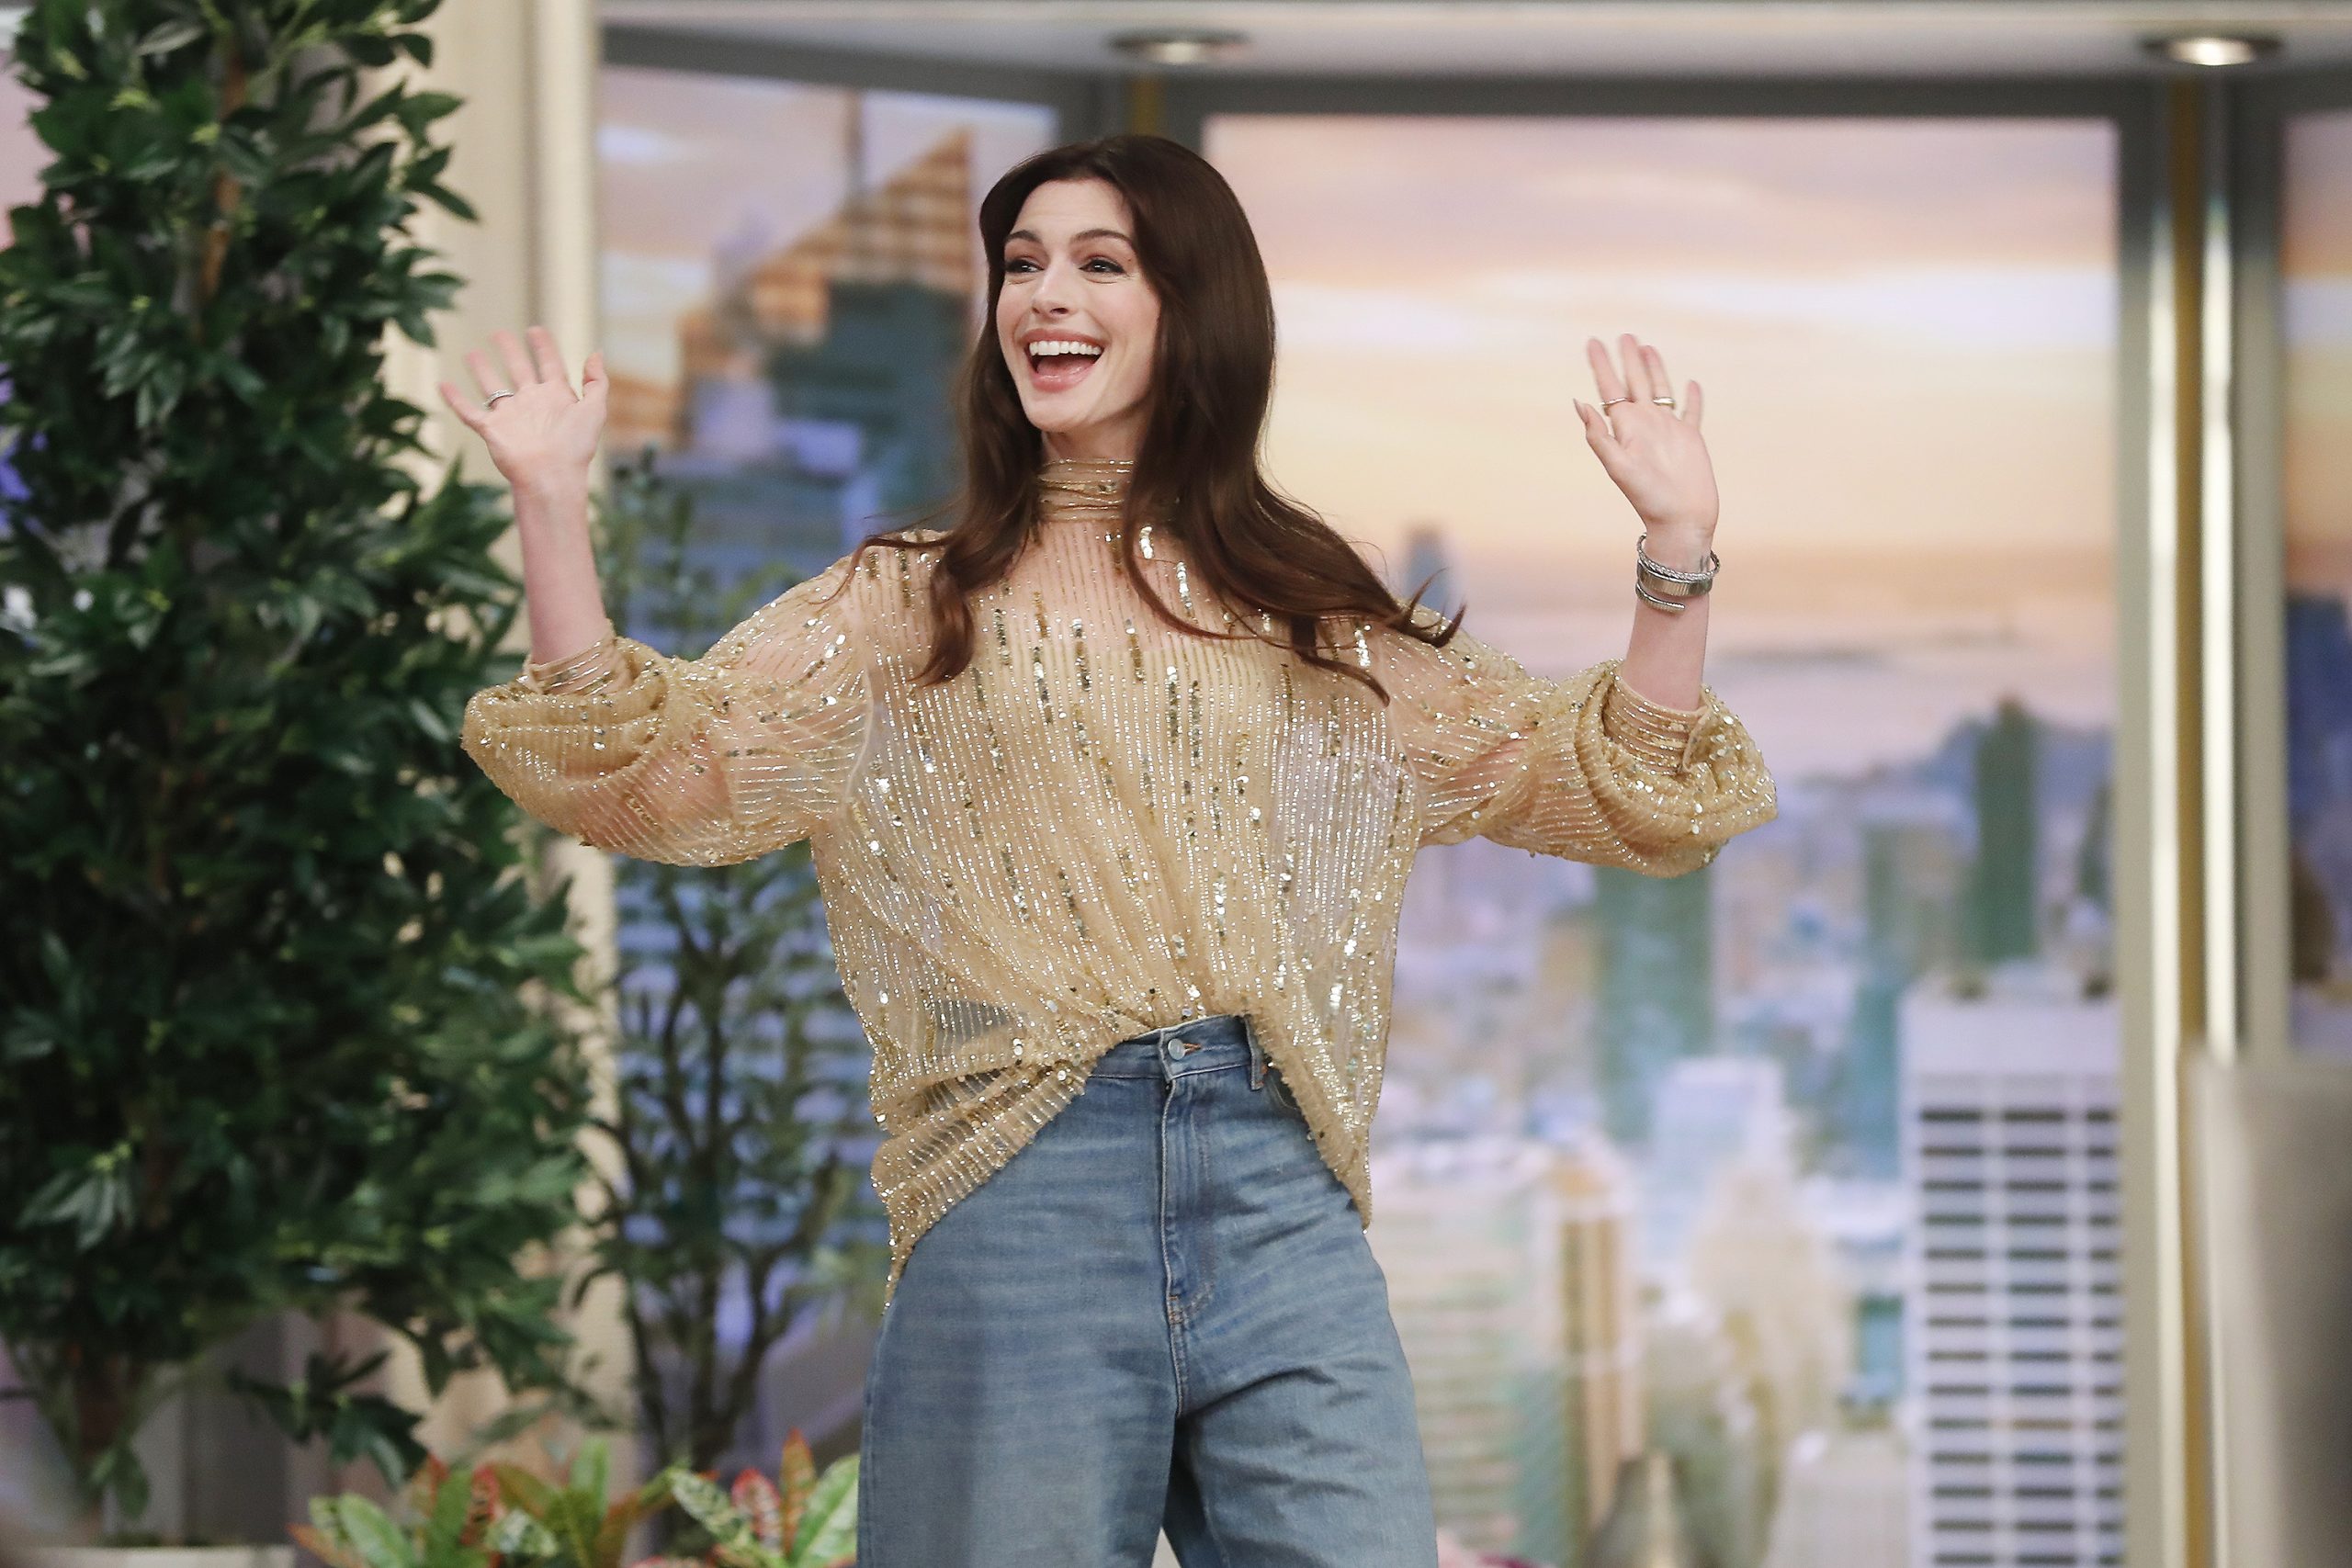 In Case You Missed It: Anne Hathaway On ‘The View’